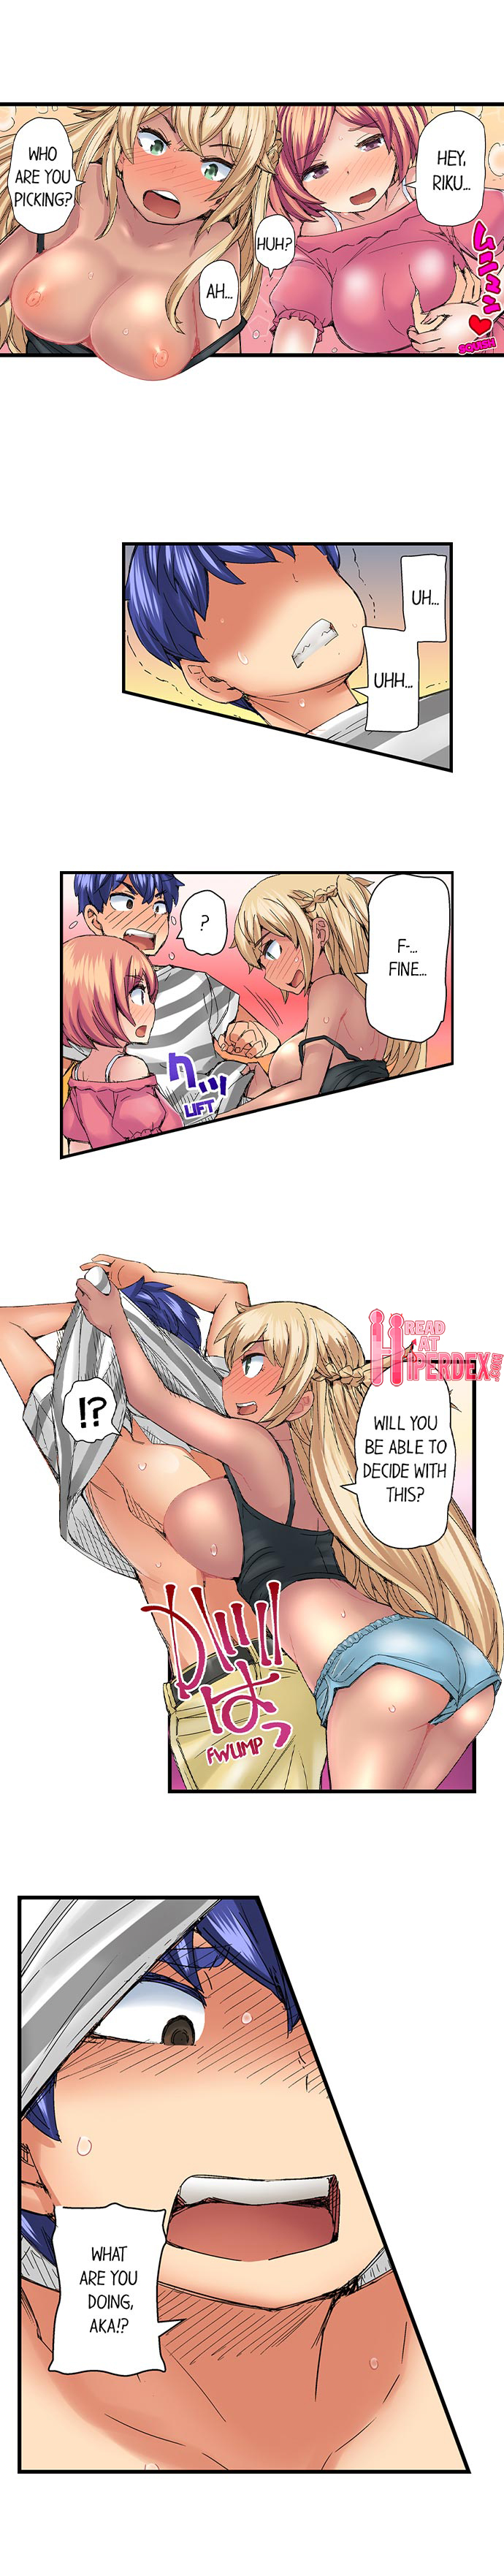 Taking a Hot Tanned Chick’s Virginity - Chapter 34 Page 2